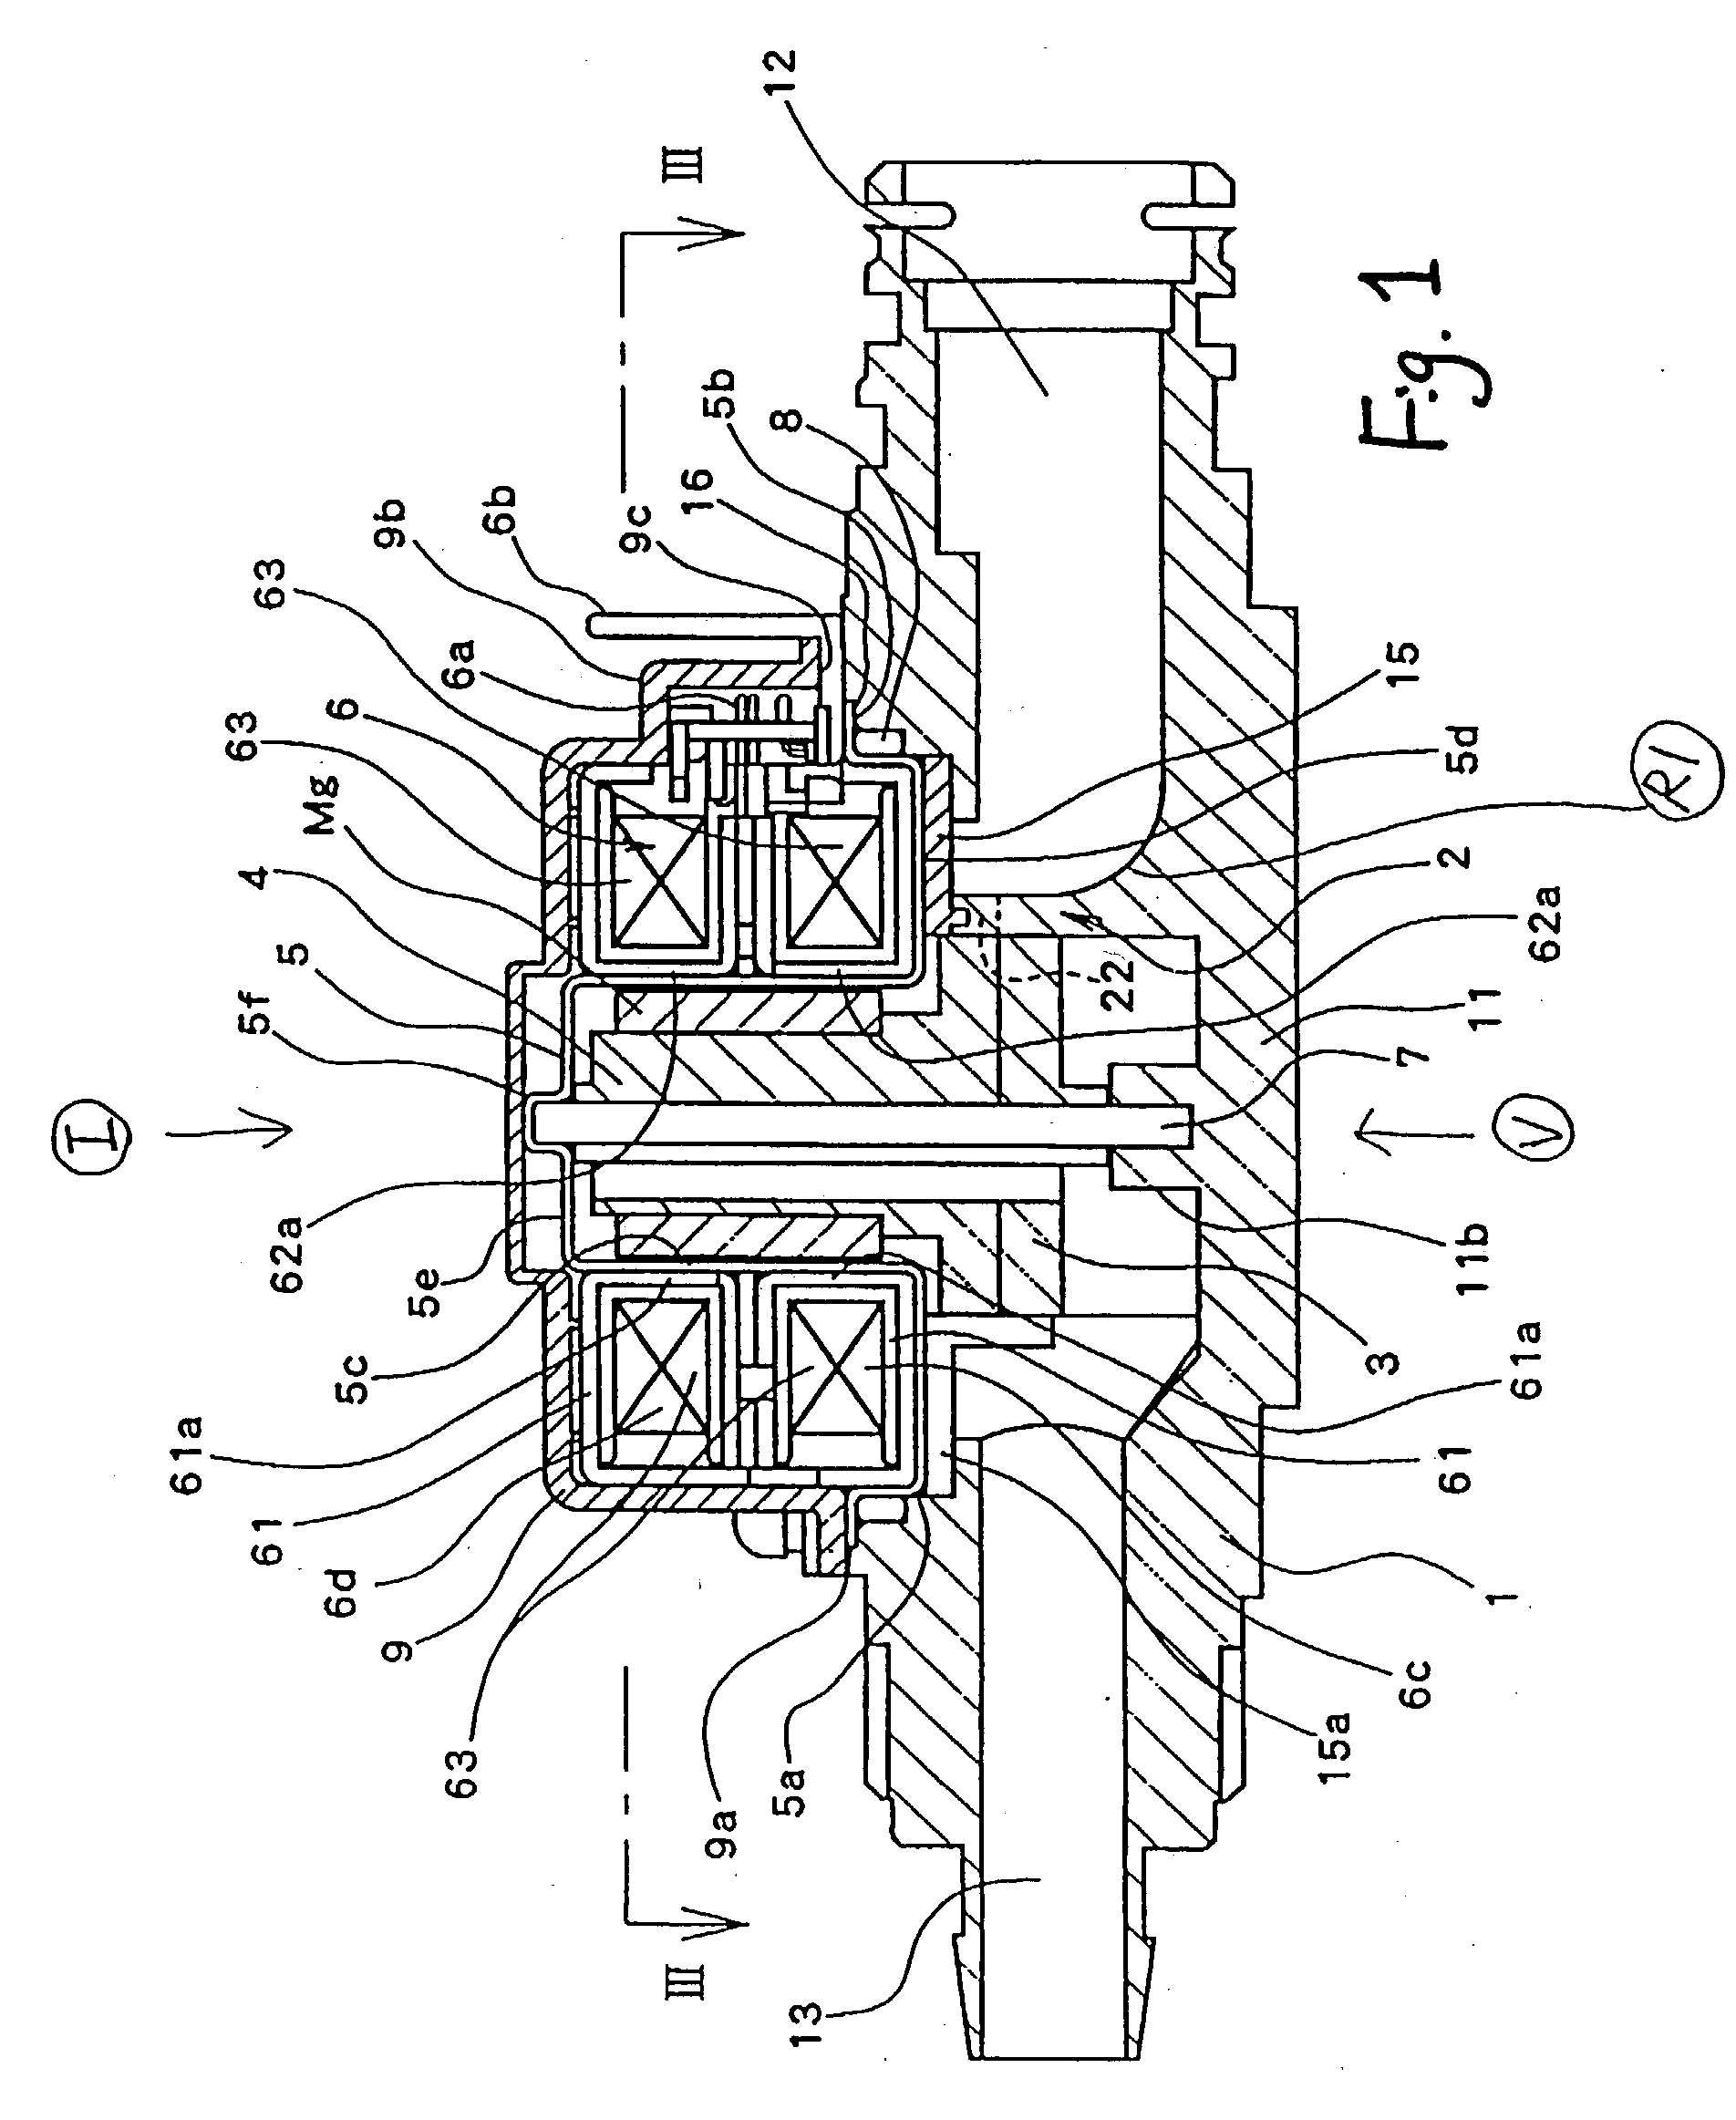 Small-sized hydroelectric power generating apparatus